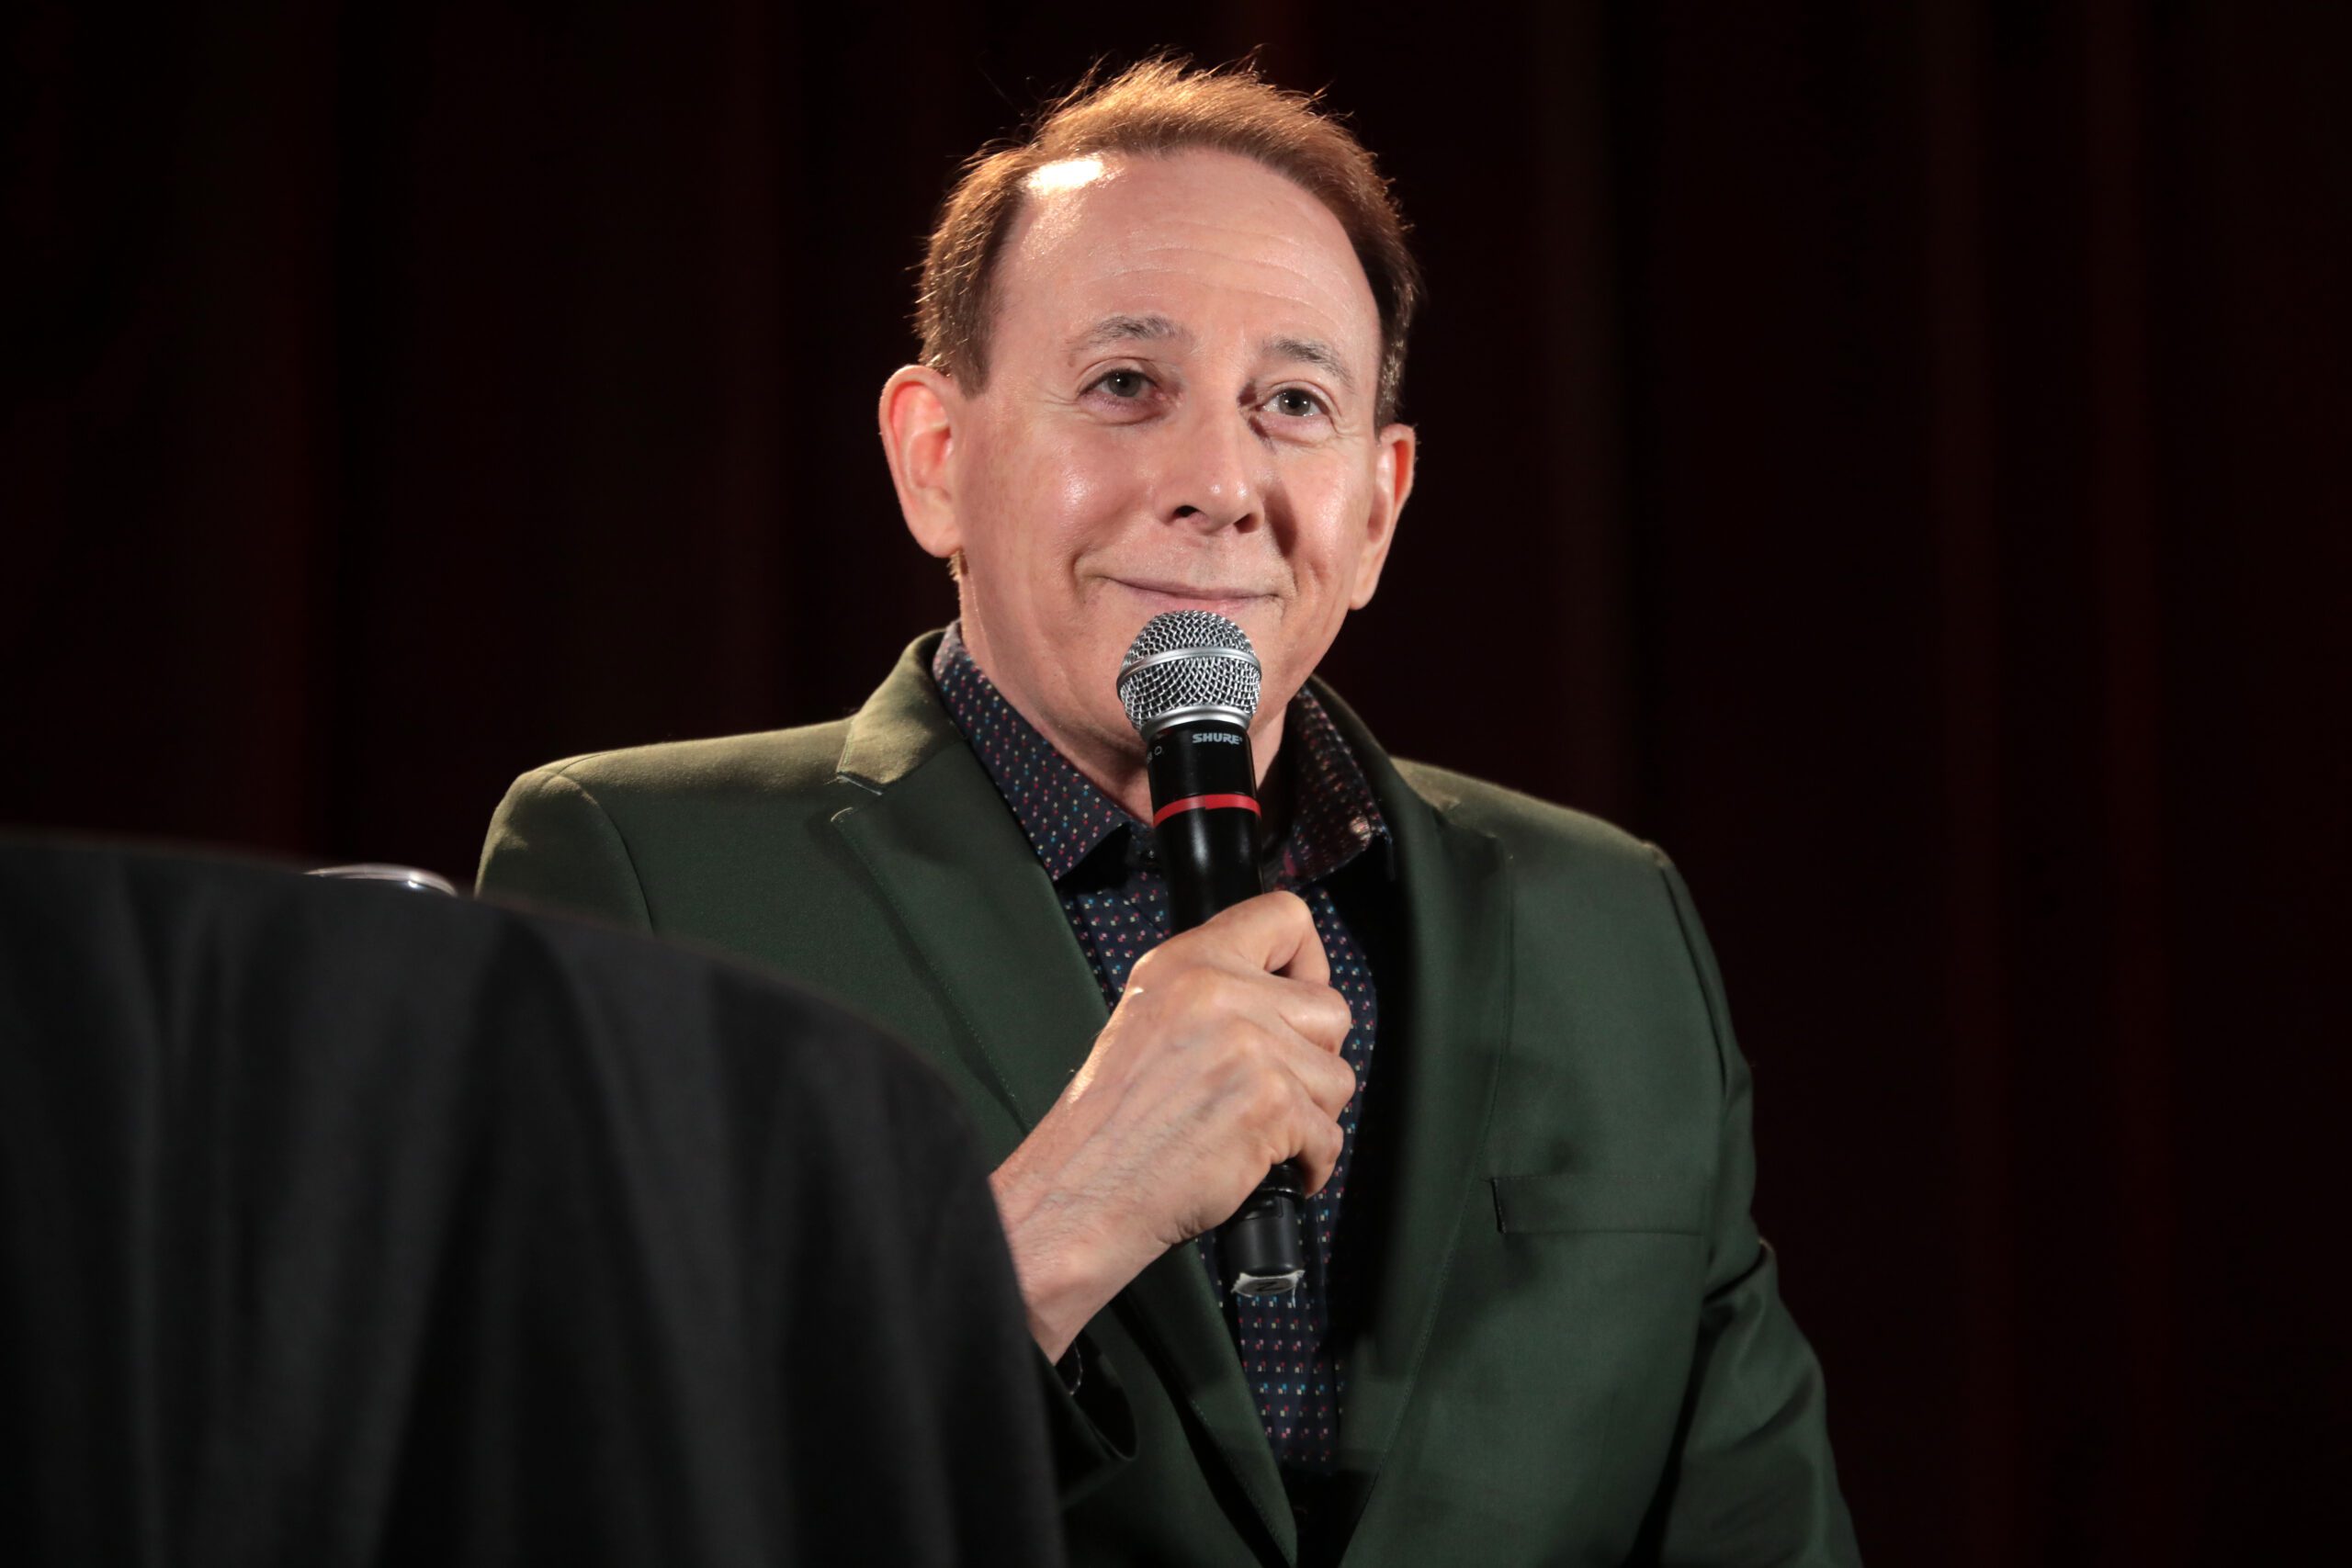 Paul Reubens speaking at a convention